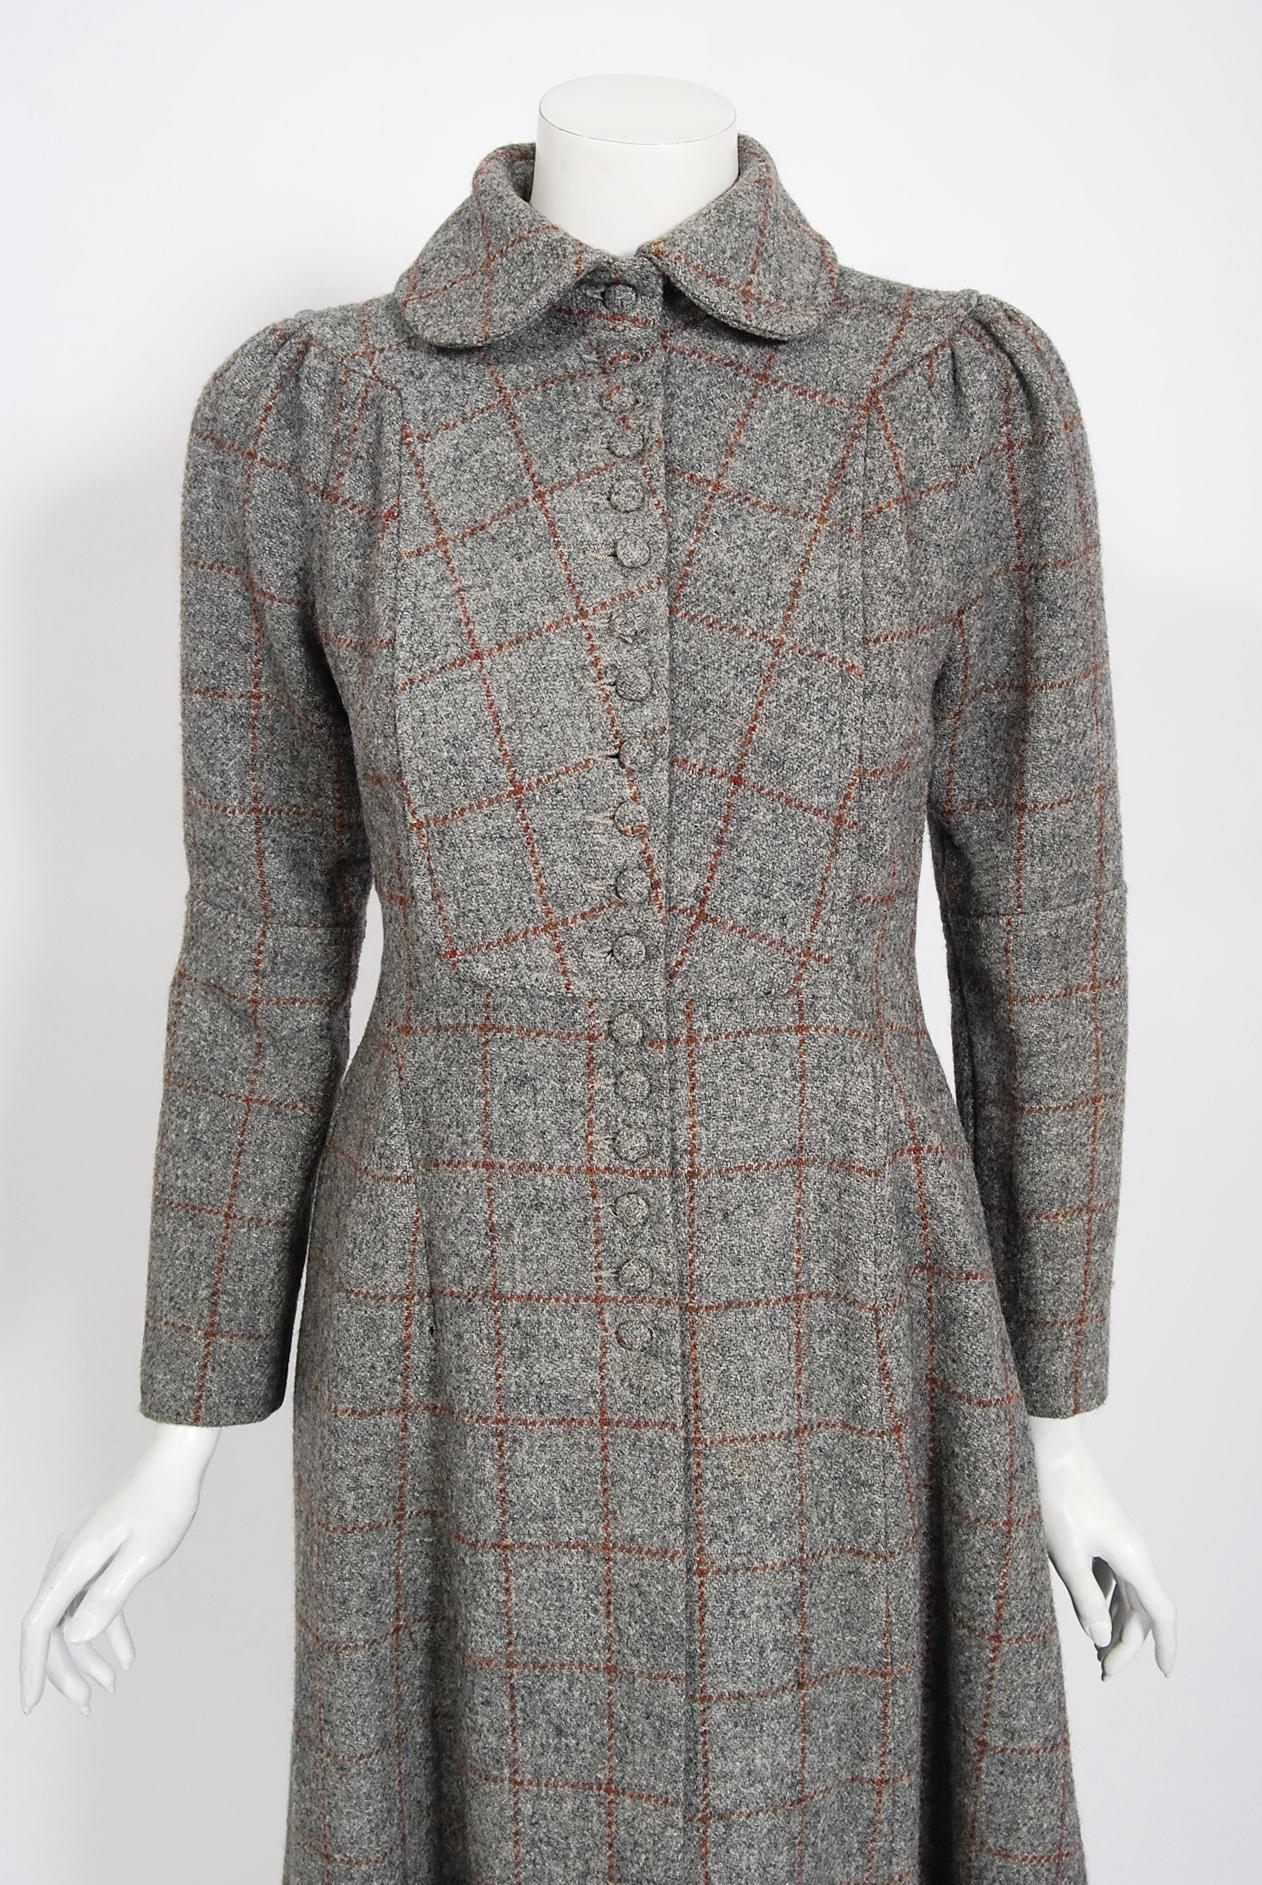 Stunning and totally timeless Ossie Clark gray and red plaid wool dress coat dating back to his 1970 couture collection. English fashion designer, Raymond 